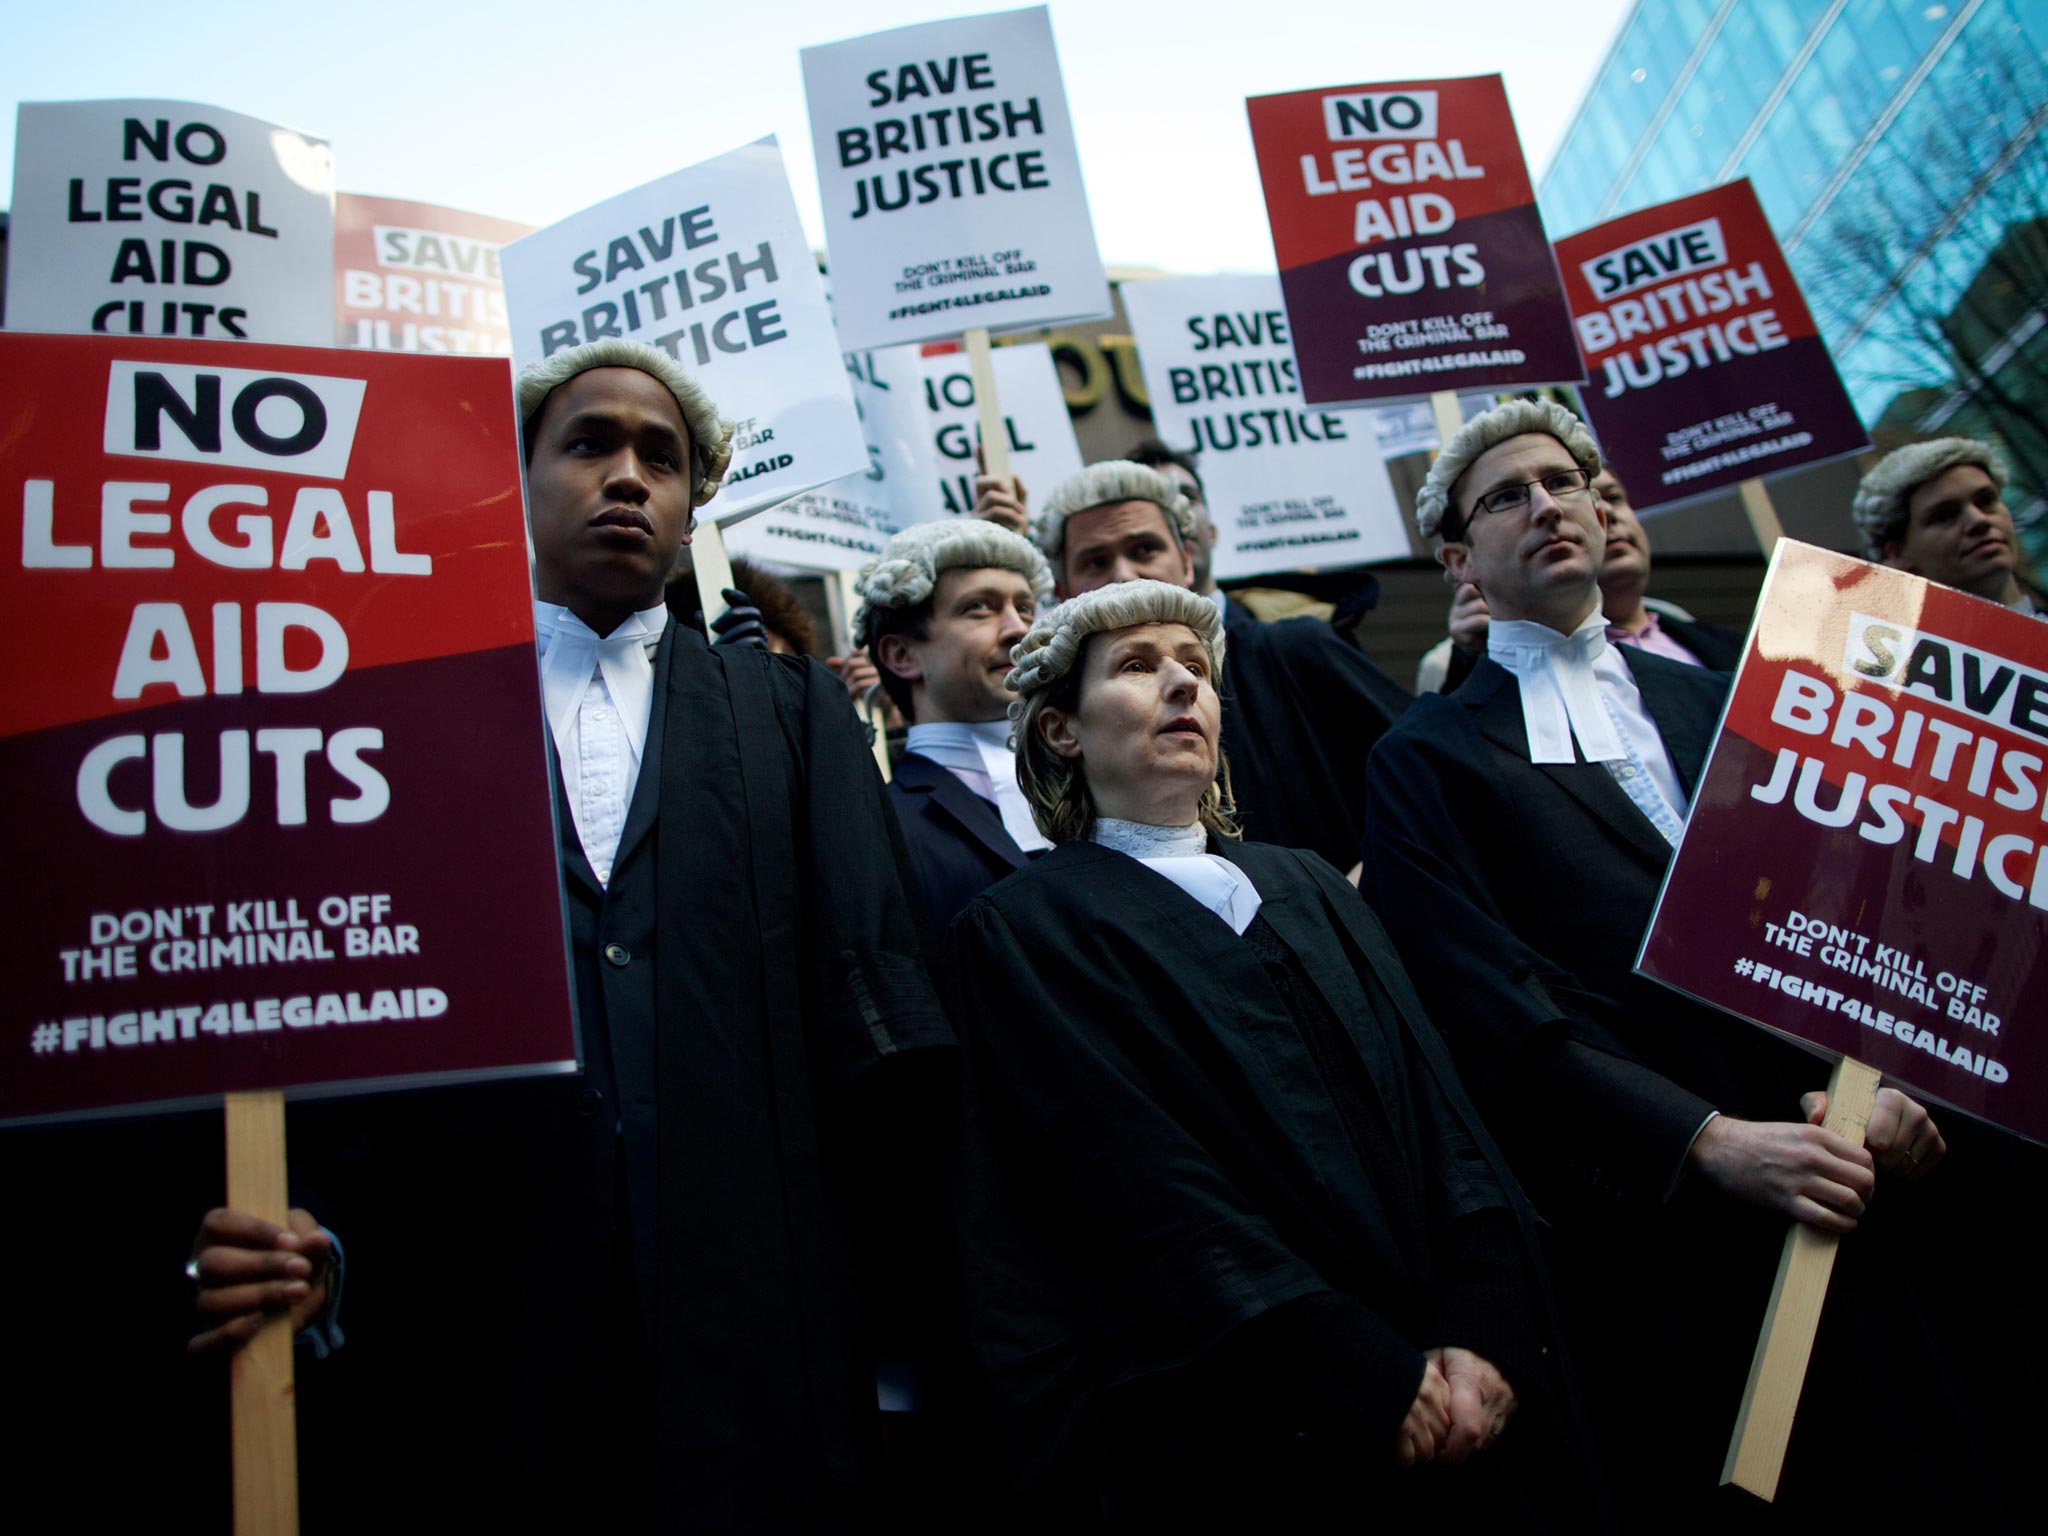 British legal professionals hold placards during a protest against cuts to the legal aid budget during a protest outside Southwark Crown Court